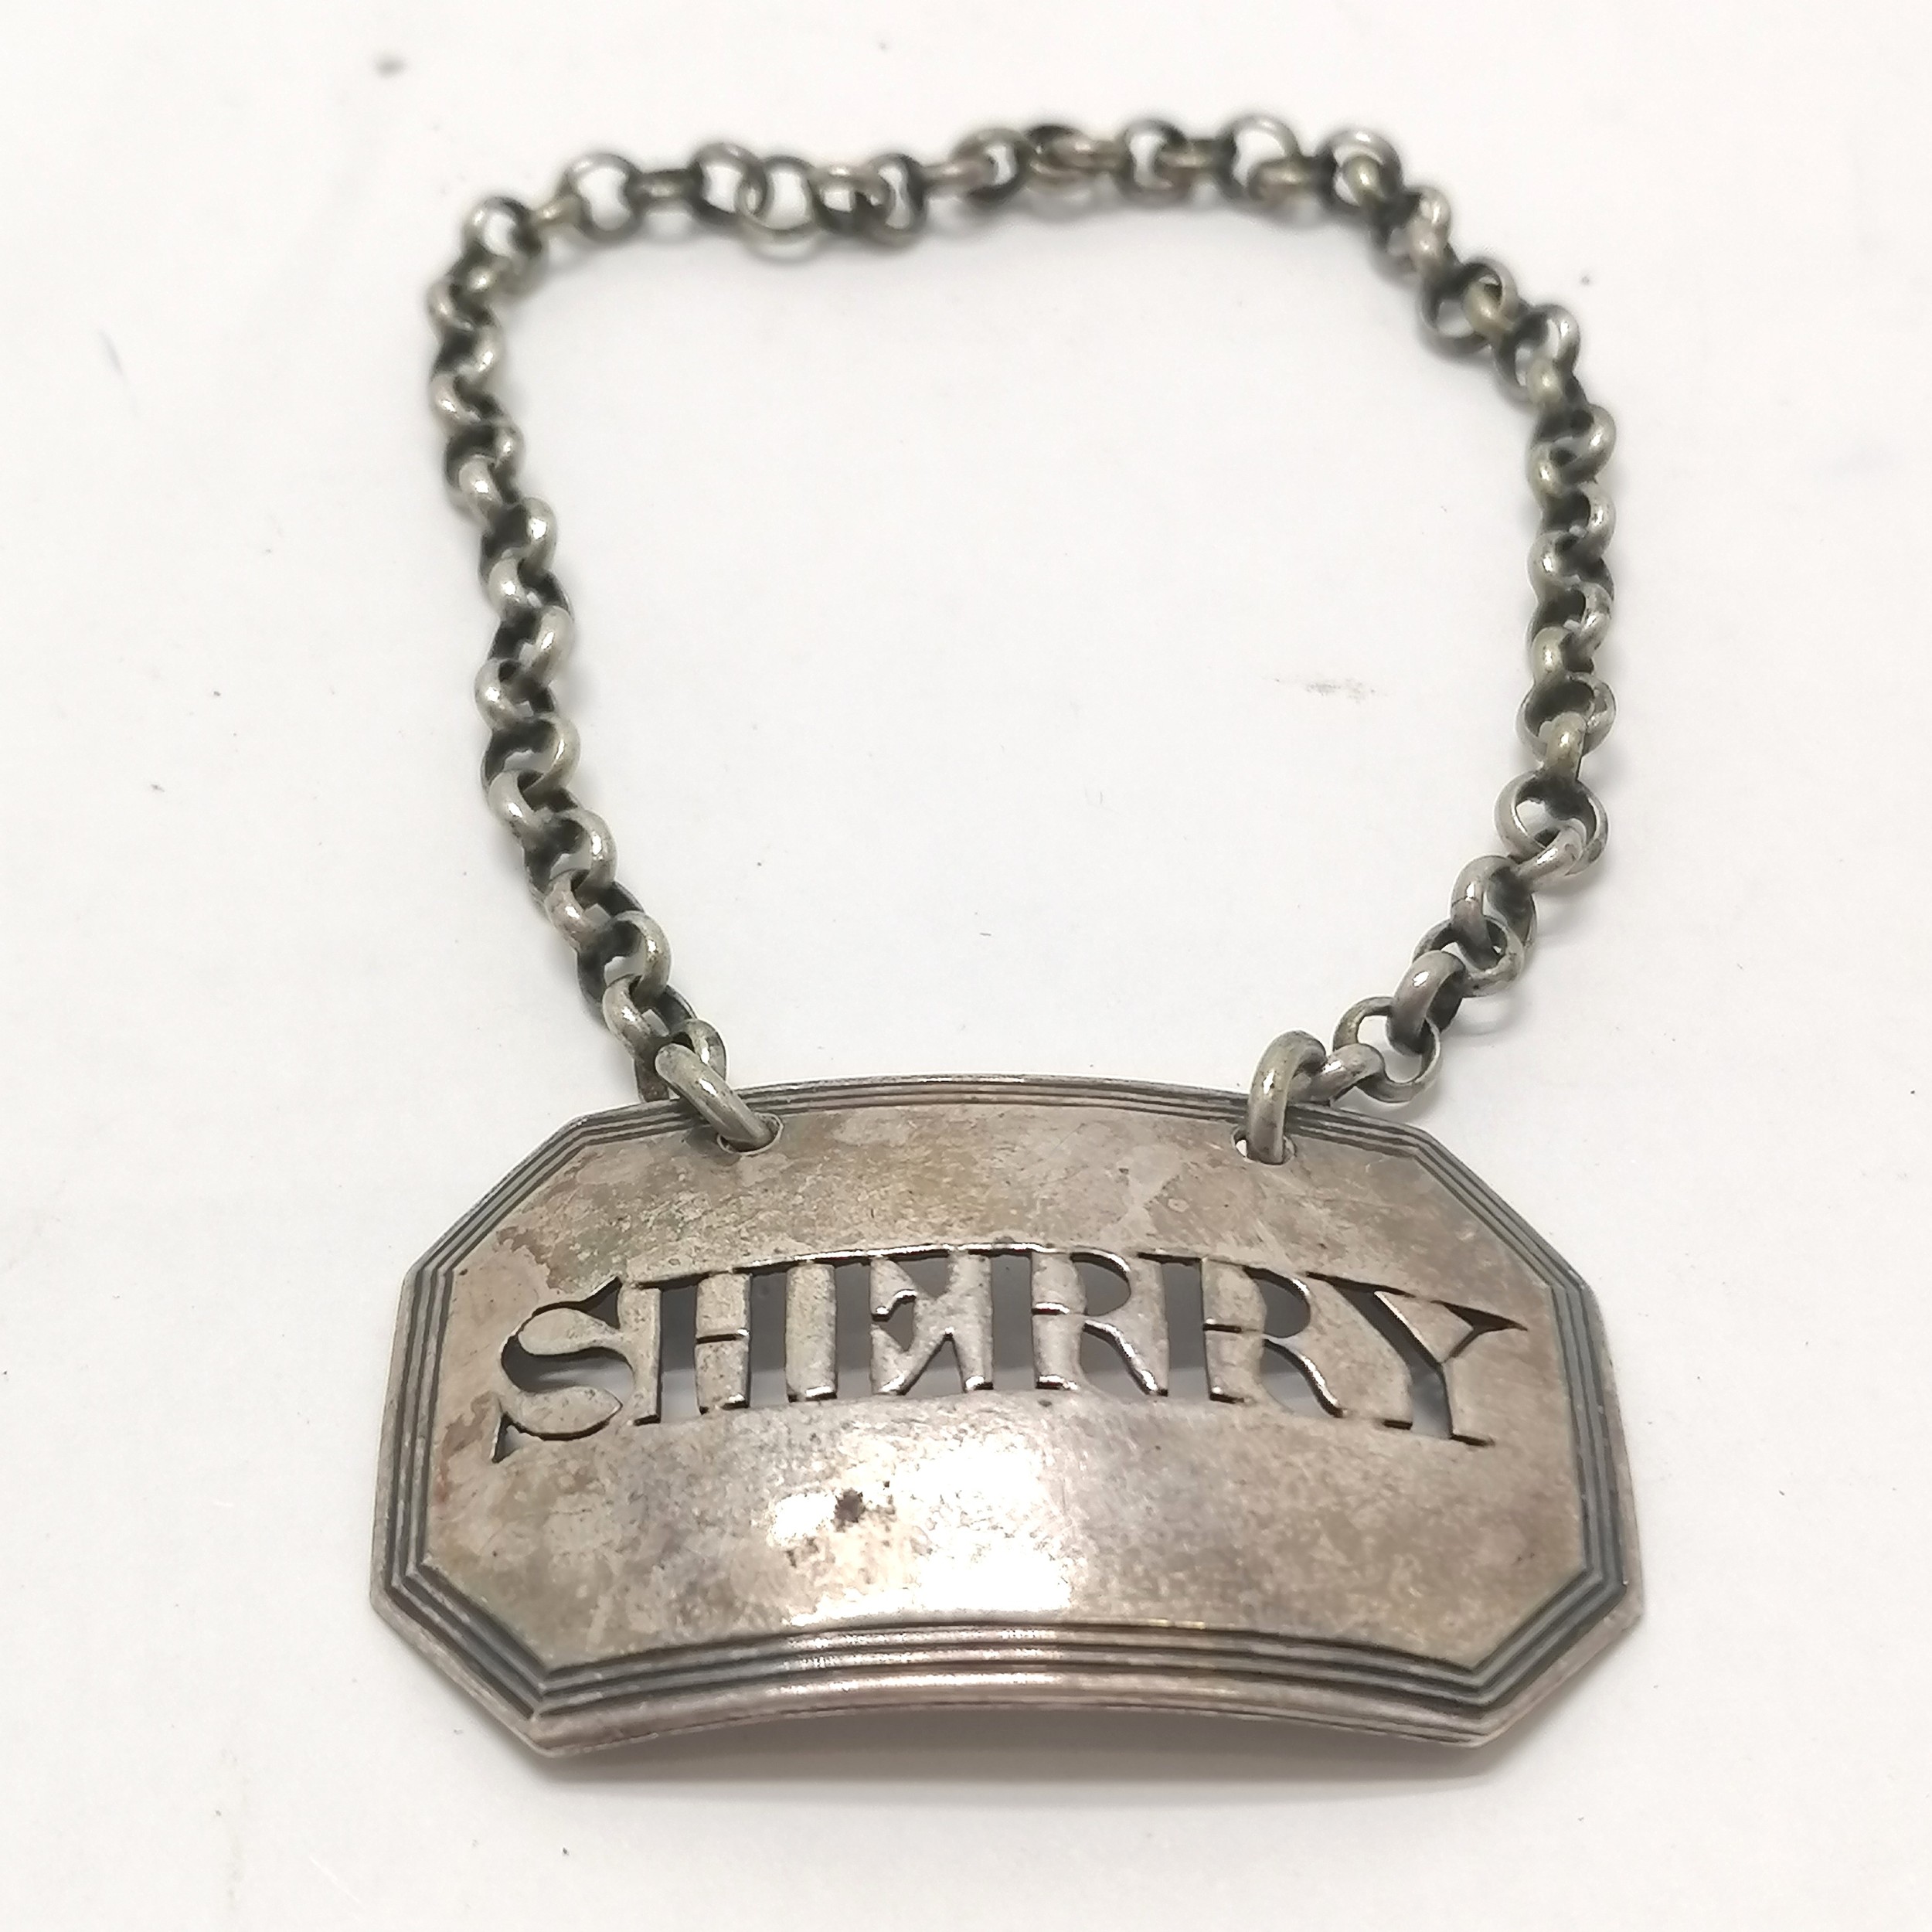 1819 silver Sherry decanter label by Thomas & James Phipps II - 4.5cm across & 13g